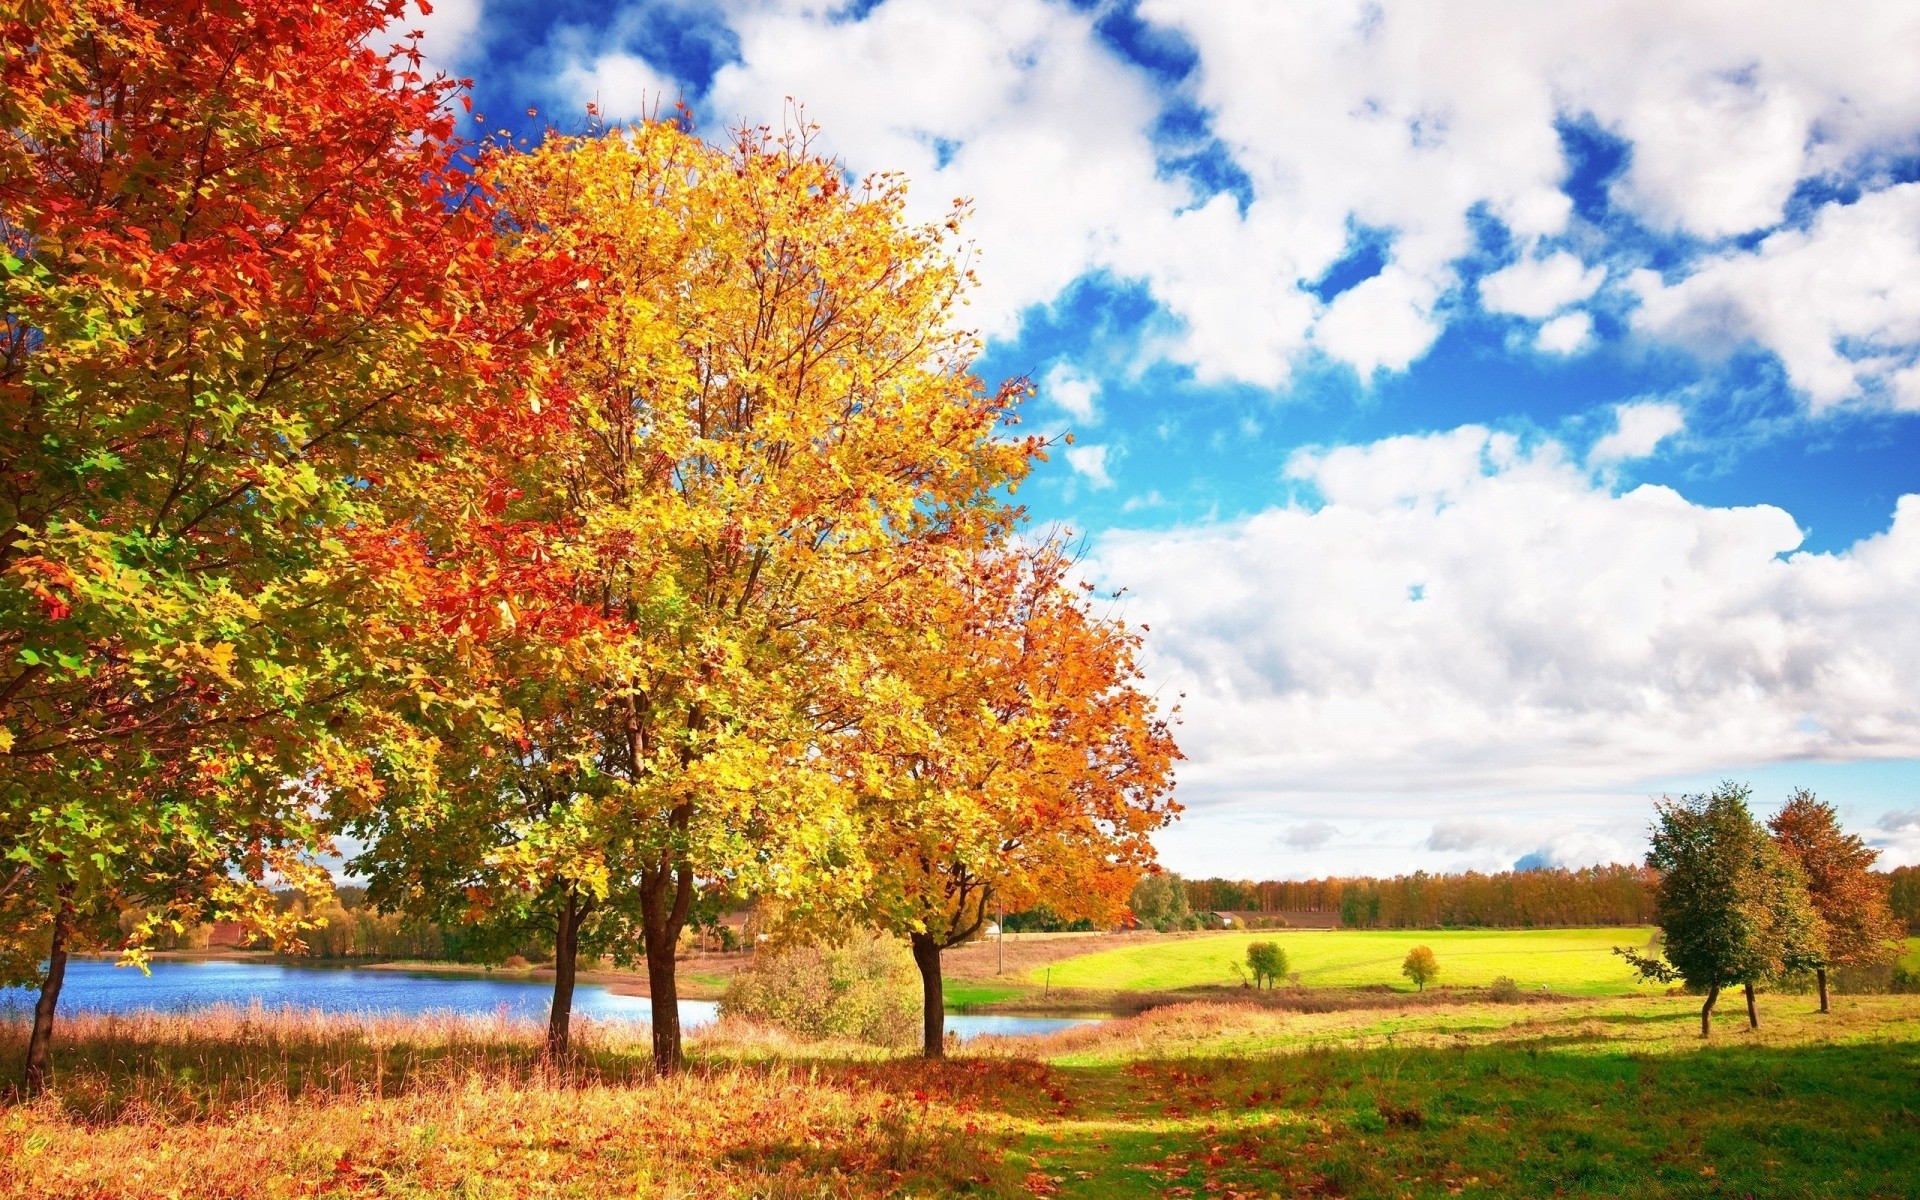 autumn fall tree landscape leaf season nature rural countryside wood scene scenic park bright scenery outdoors fair weather country color branch